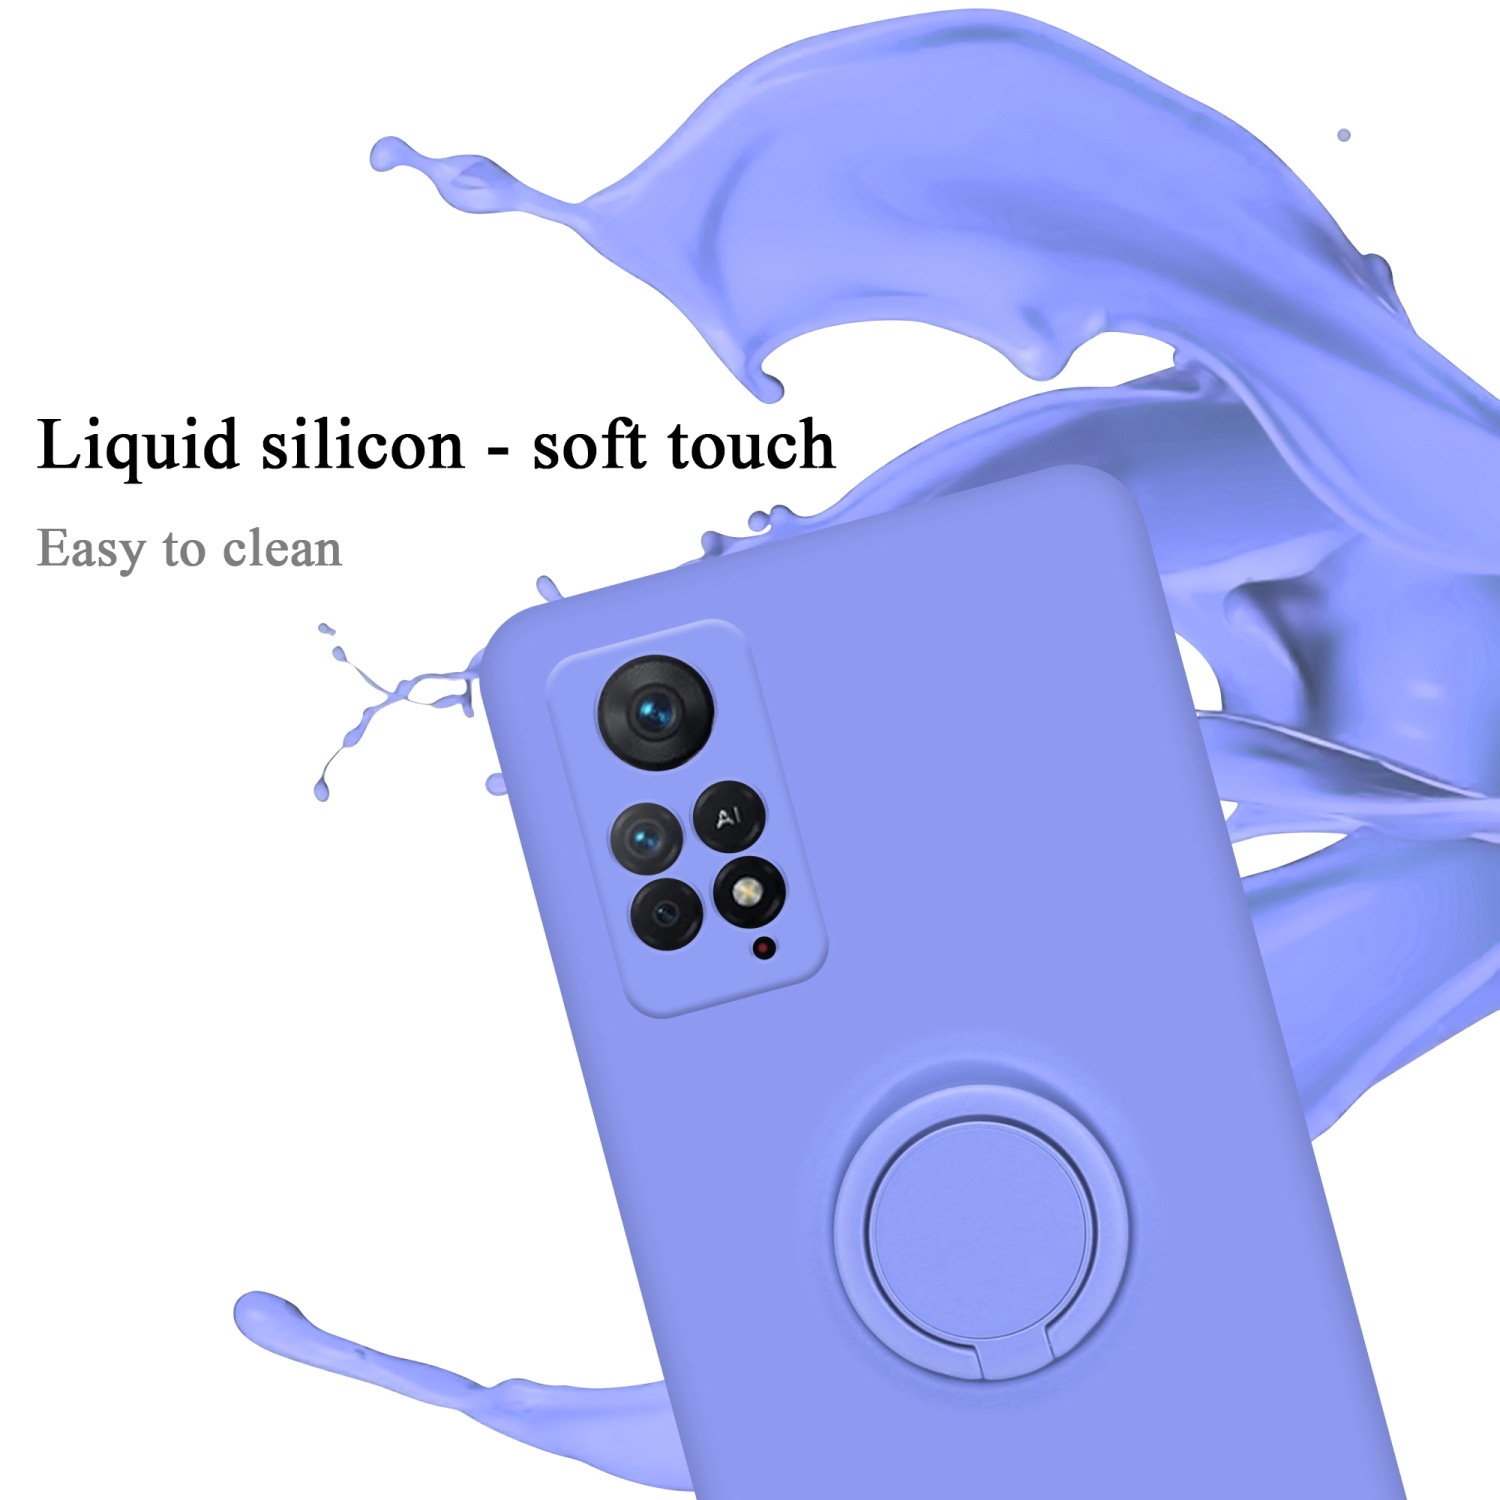 Style, LIQUID HELL PRO Liquid Ring CADORABO Xiaomi, 11 NOTE 4G Hülle im Backcover, RedMi 5G, Case Silicone LILA /